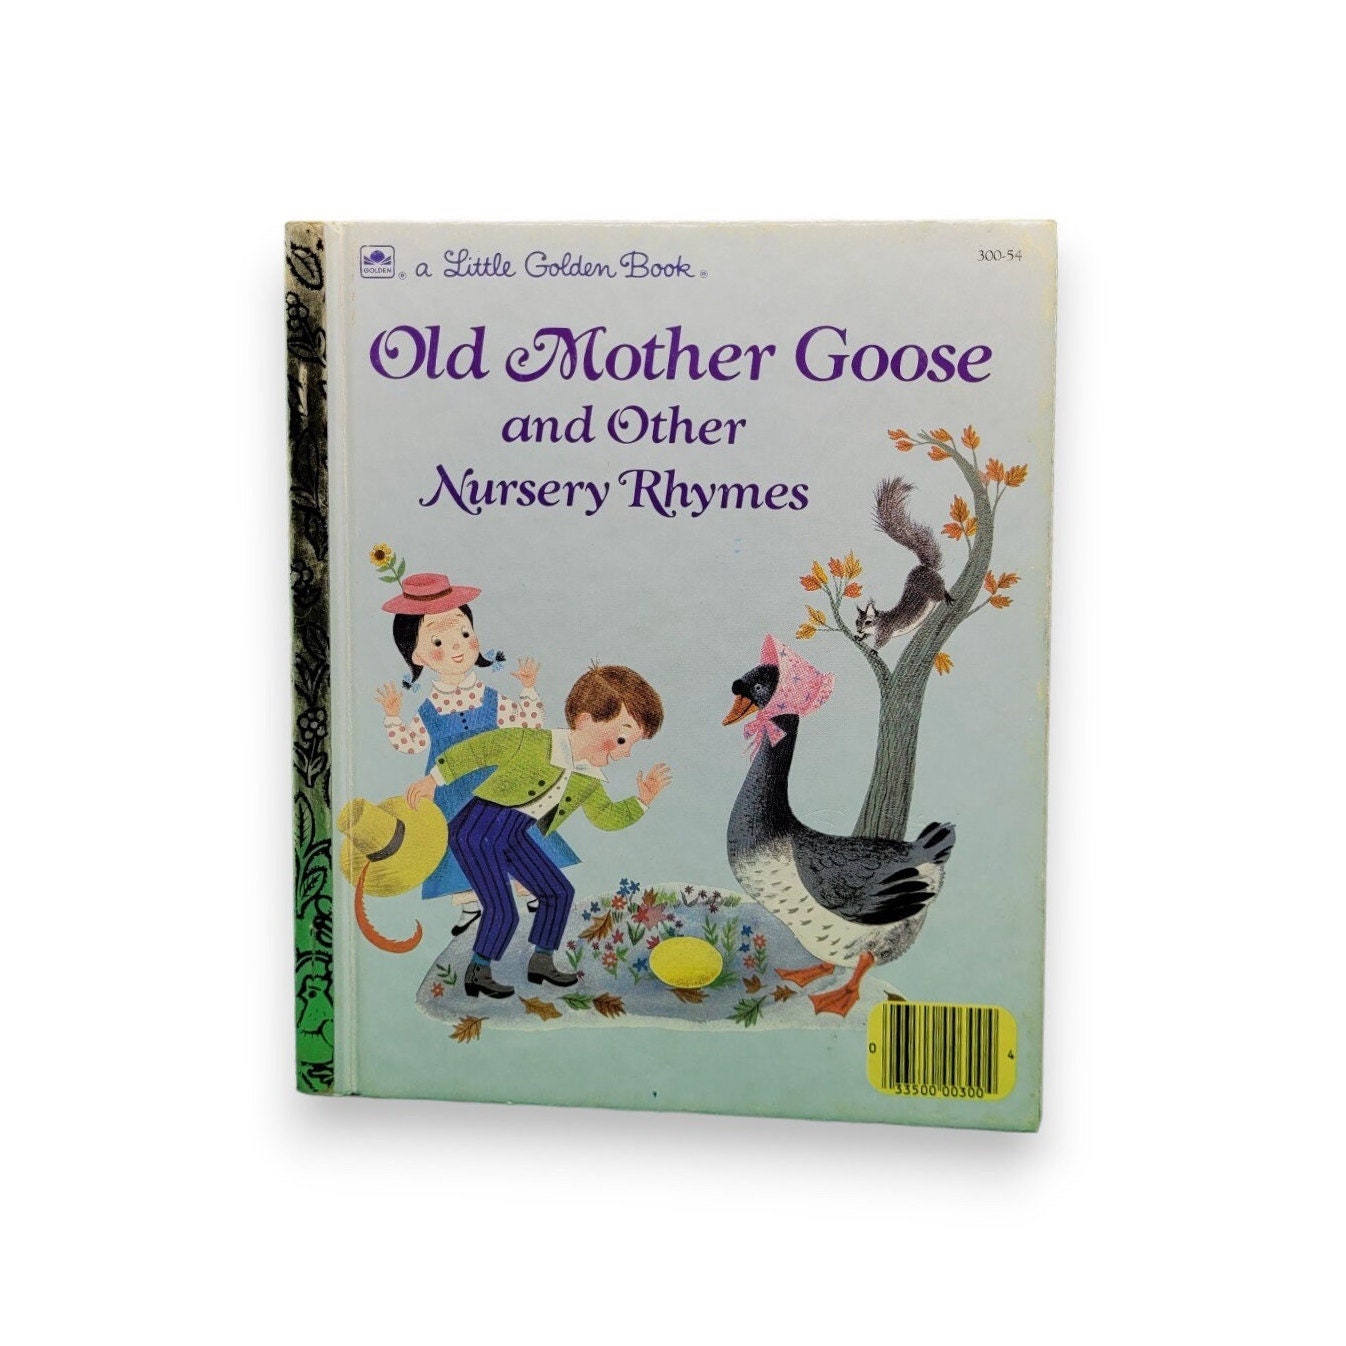 Old Mother Goose and Other Nursery Rhymes (A Golden Book) 1988